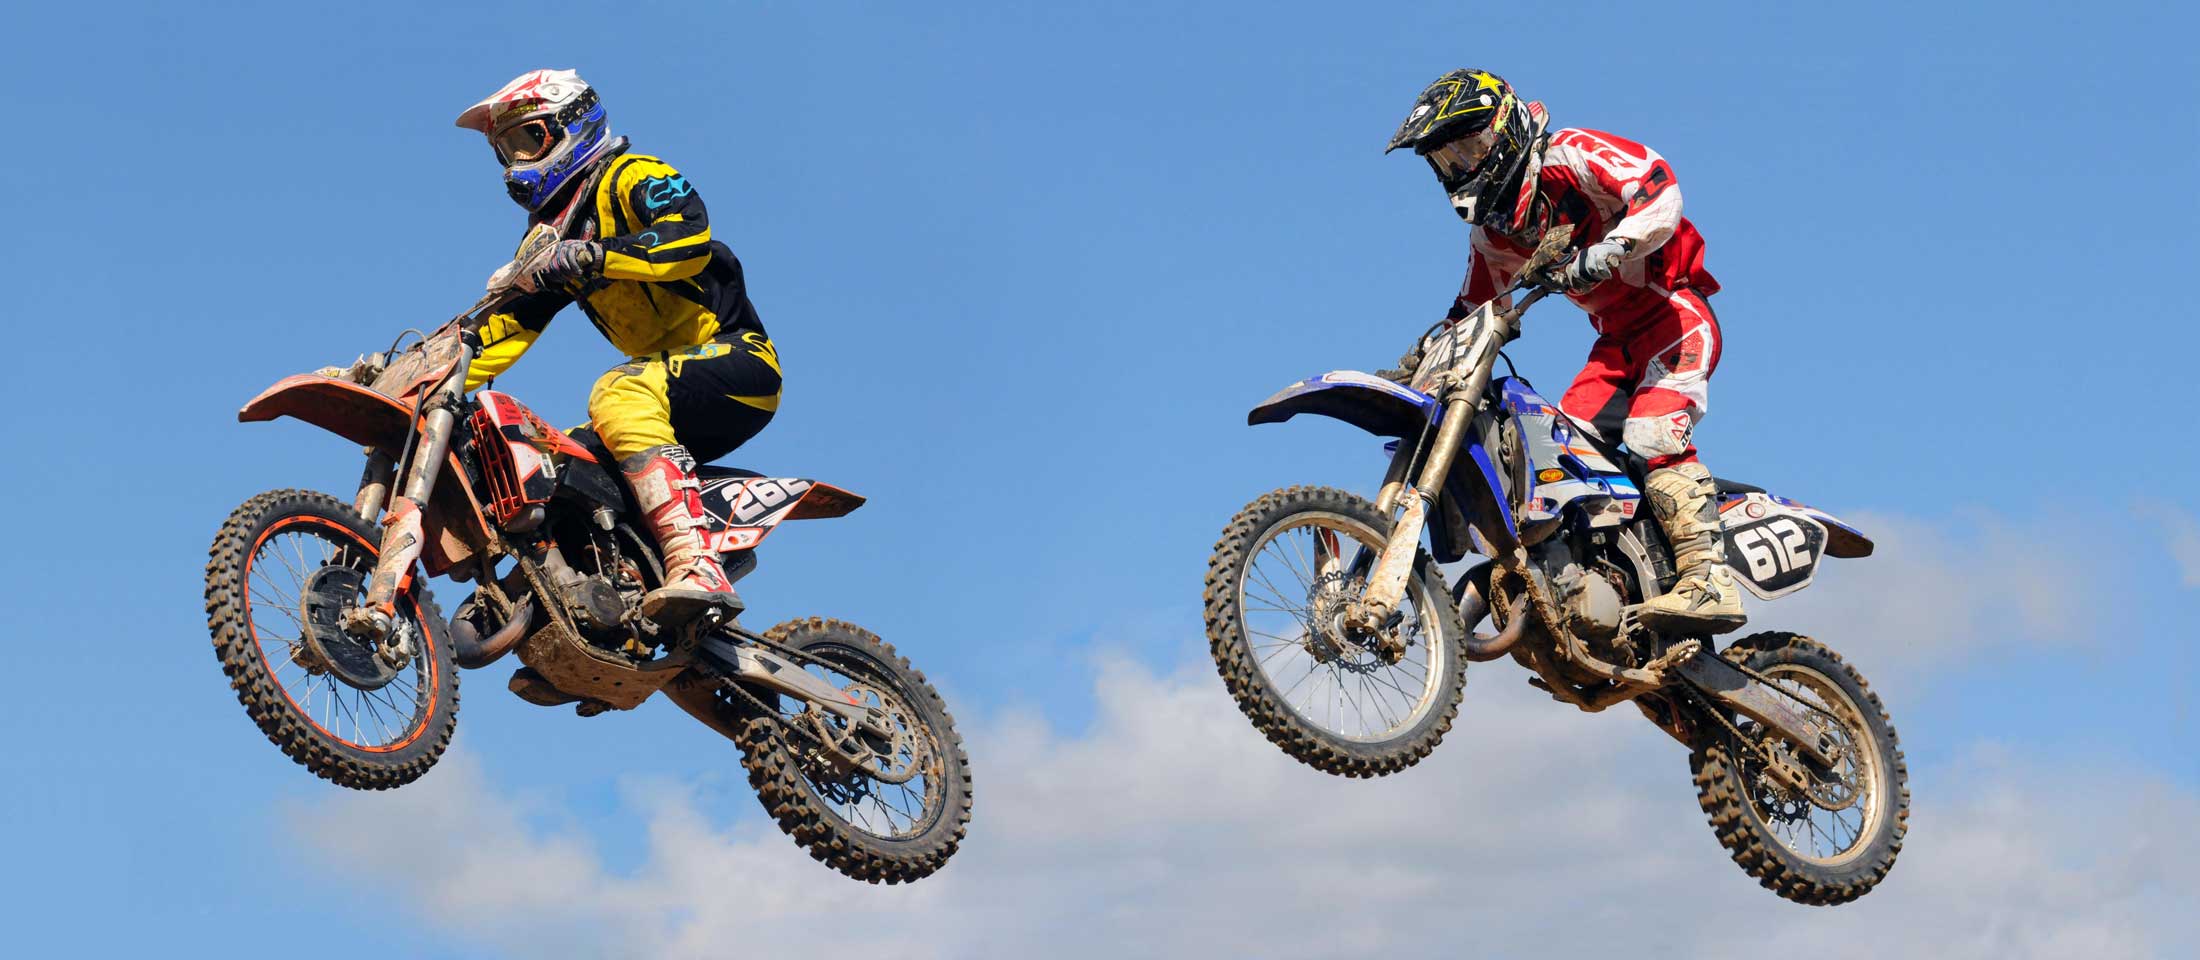 two motocross bikers jumping